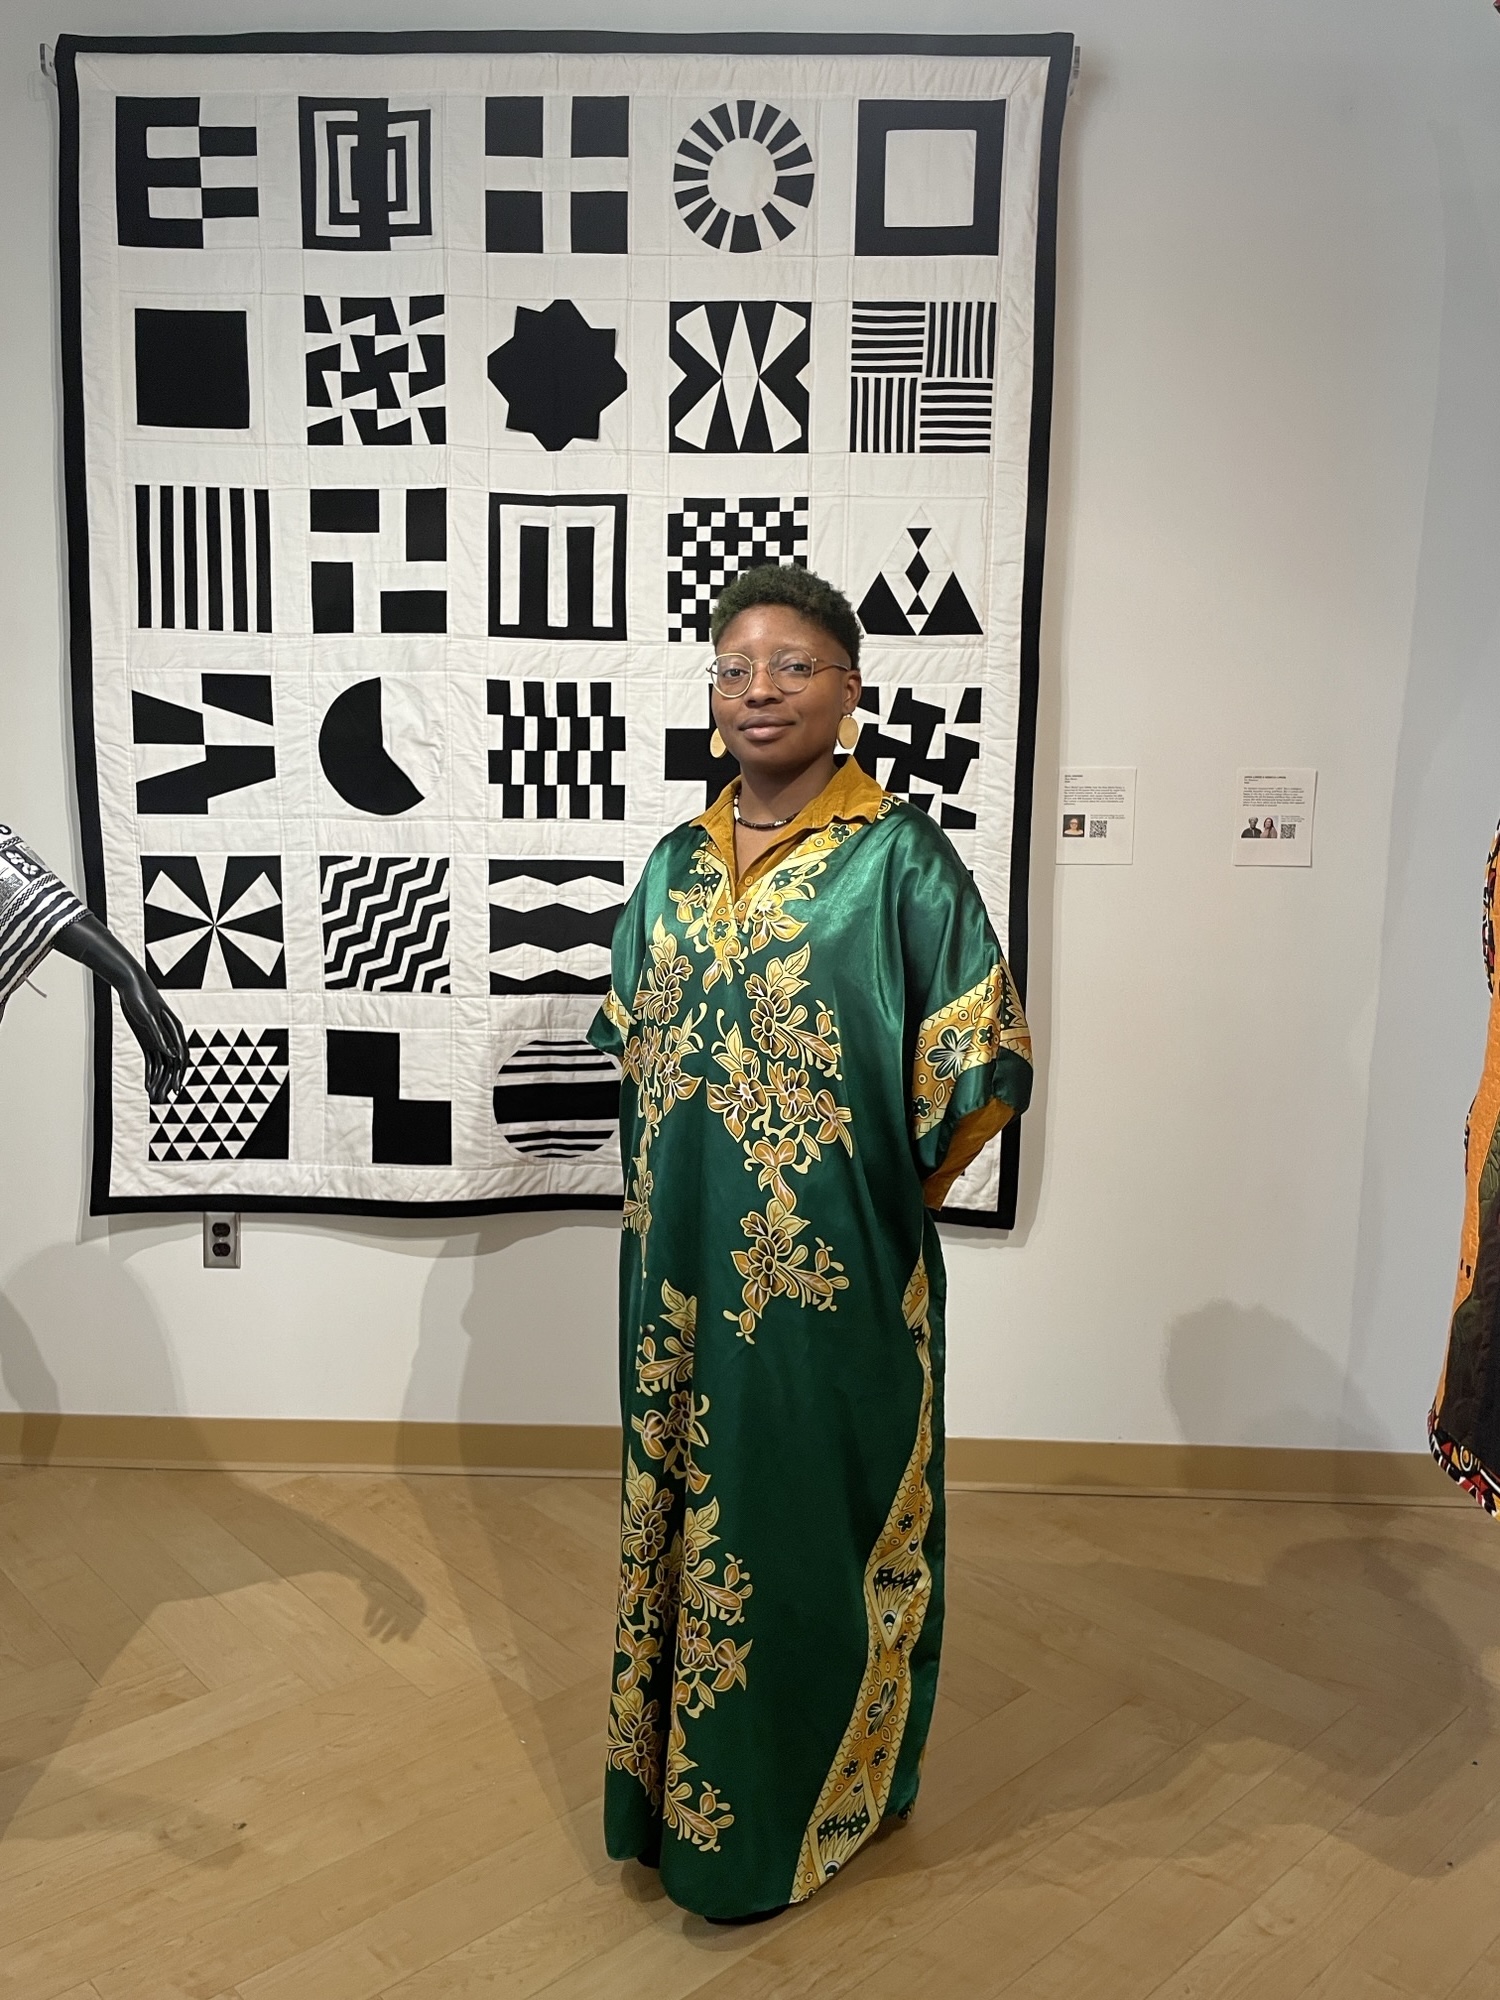 Morgan Hill poses with a quilt on display in the background